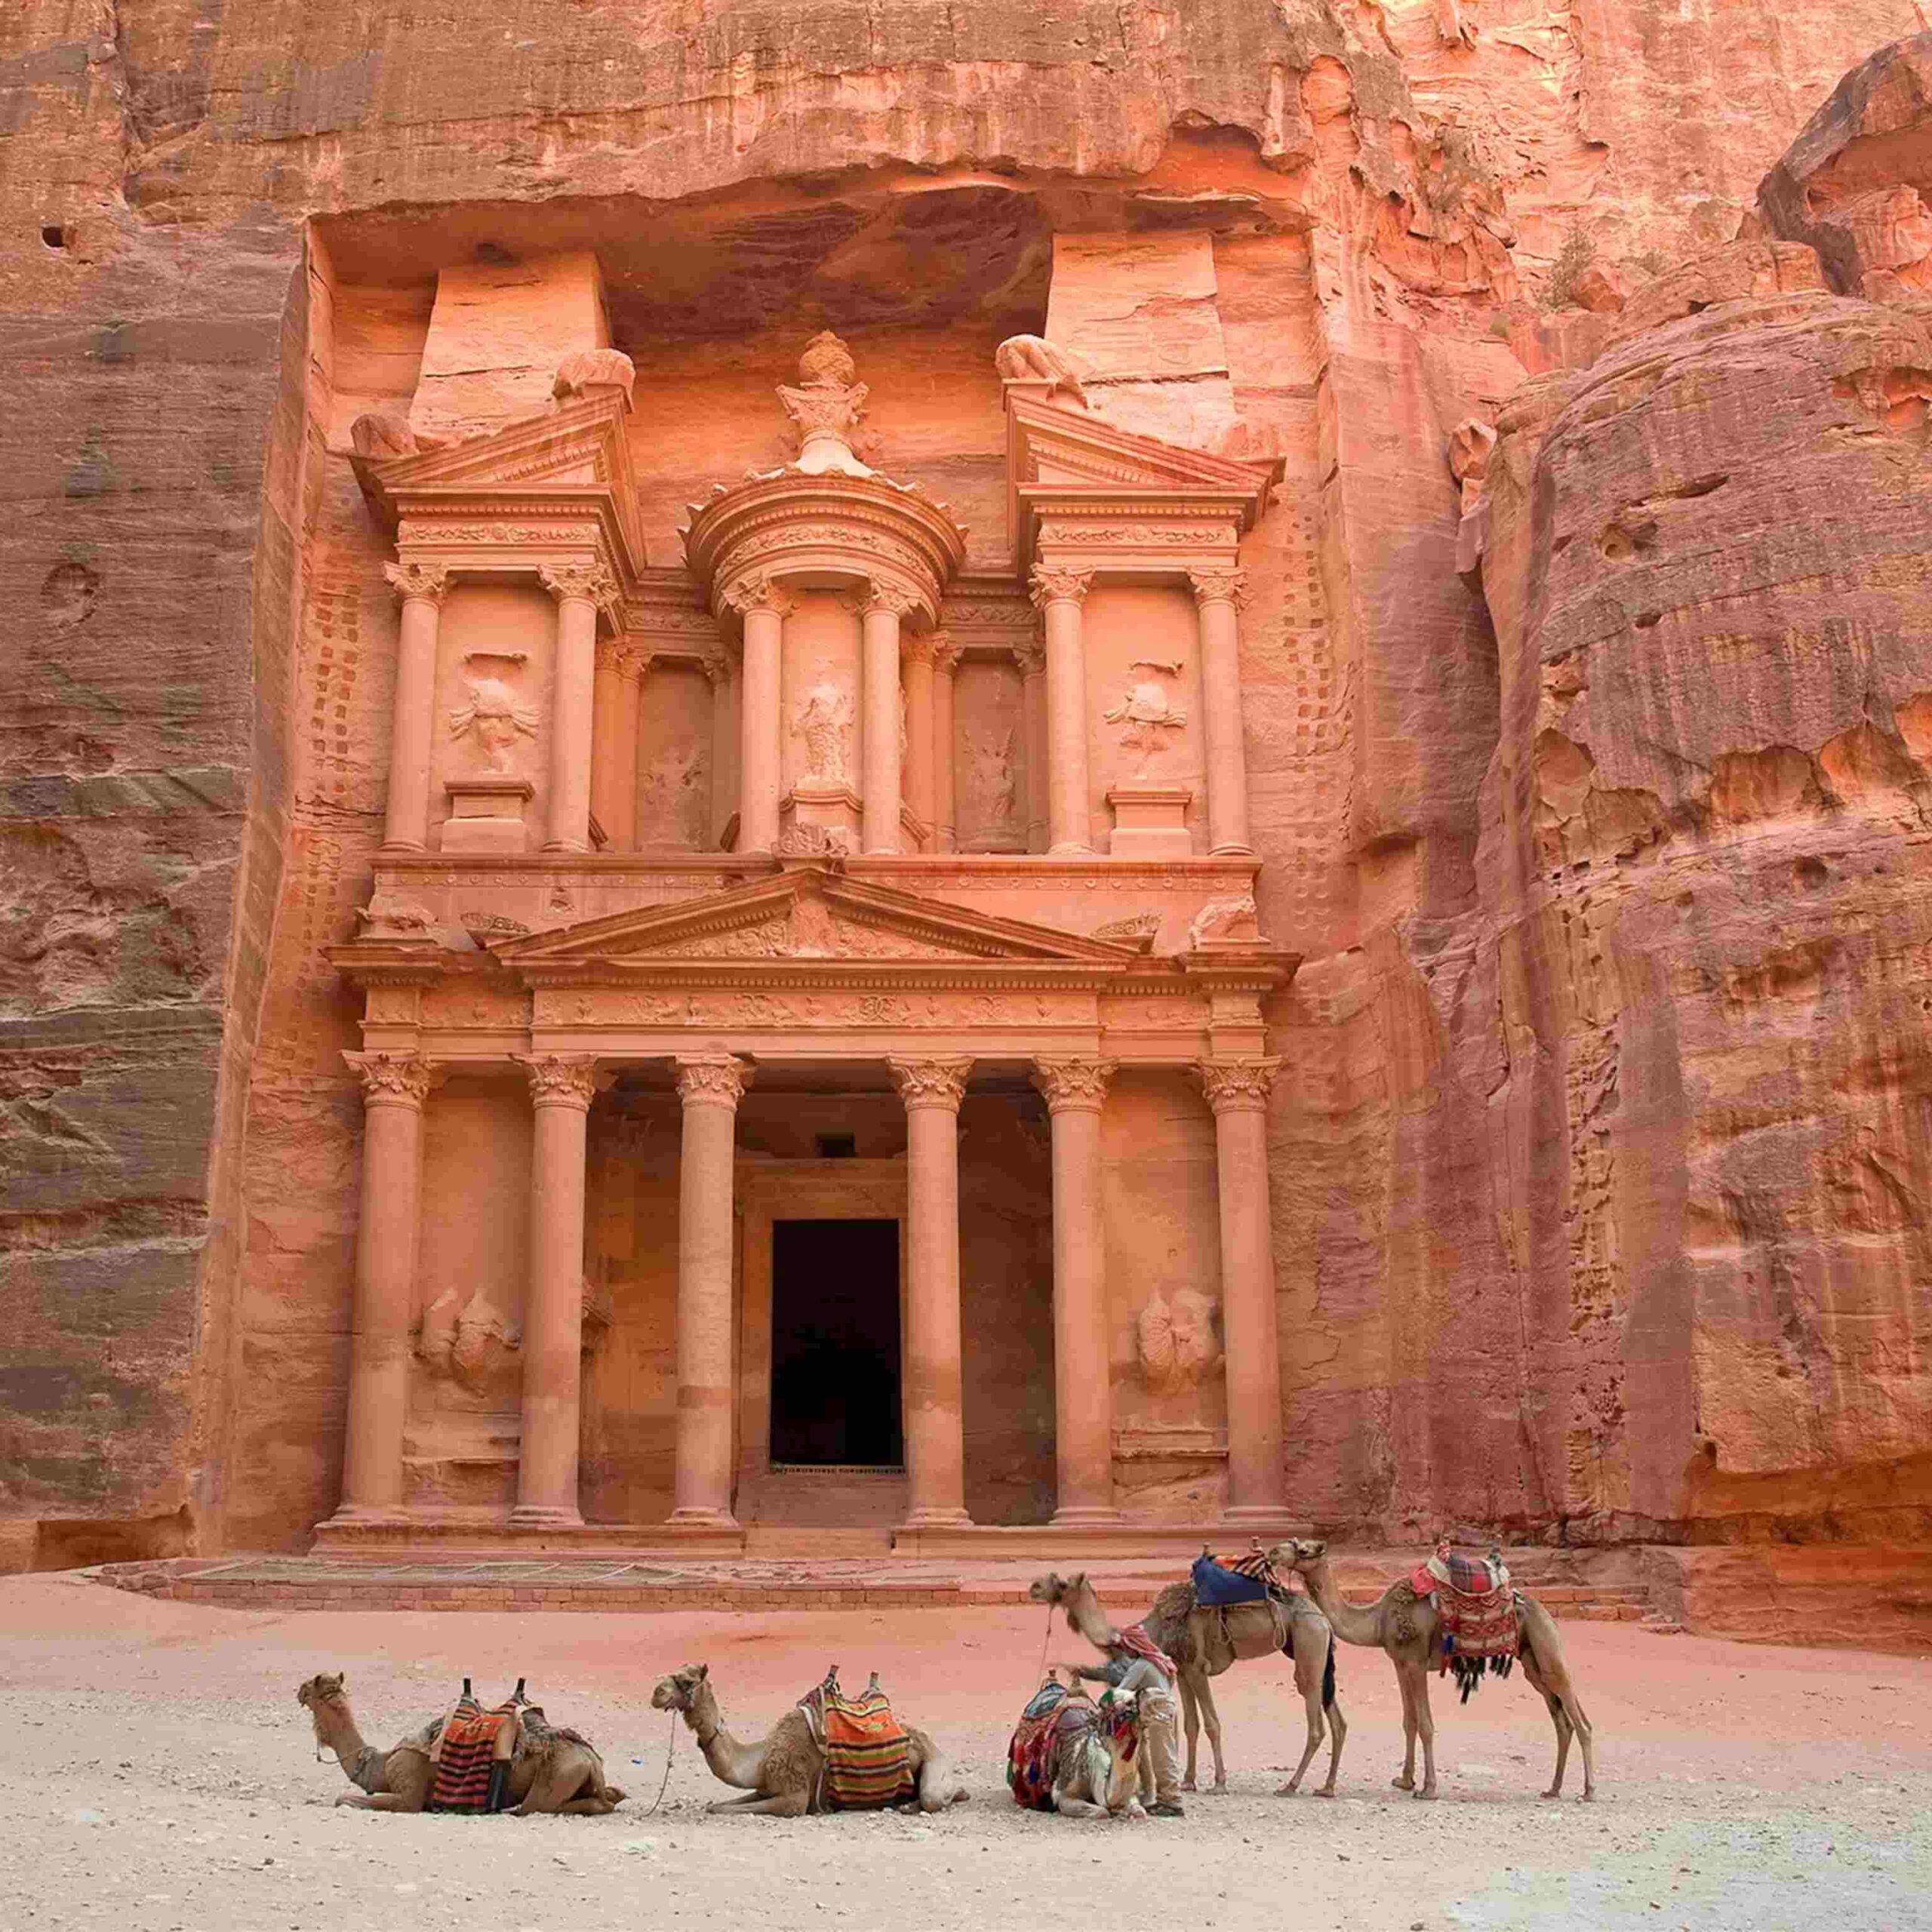 The majestic Monastery, perched atop the mountains of Petra